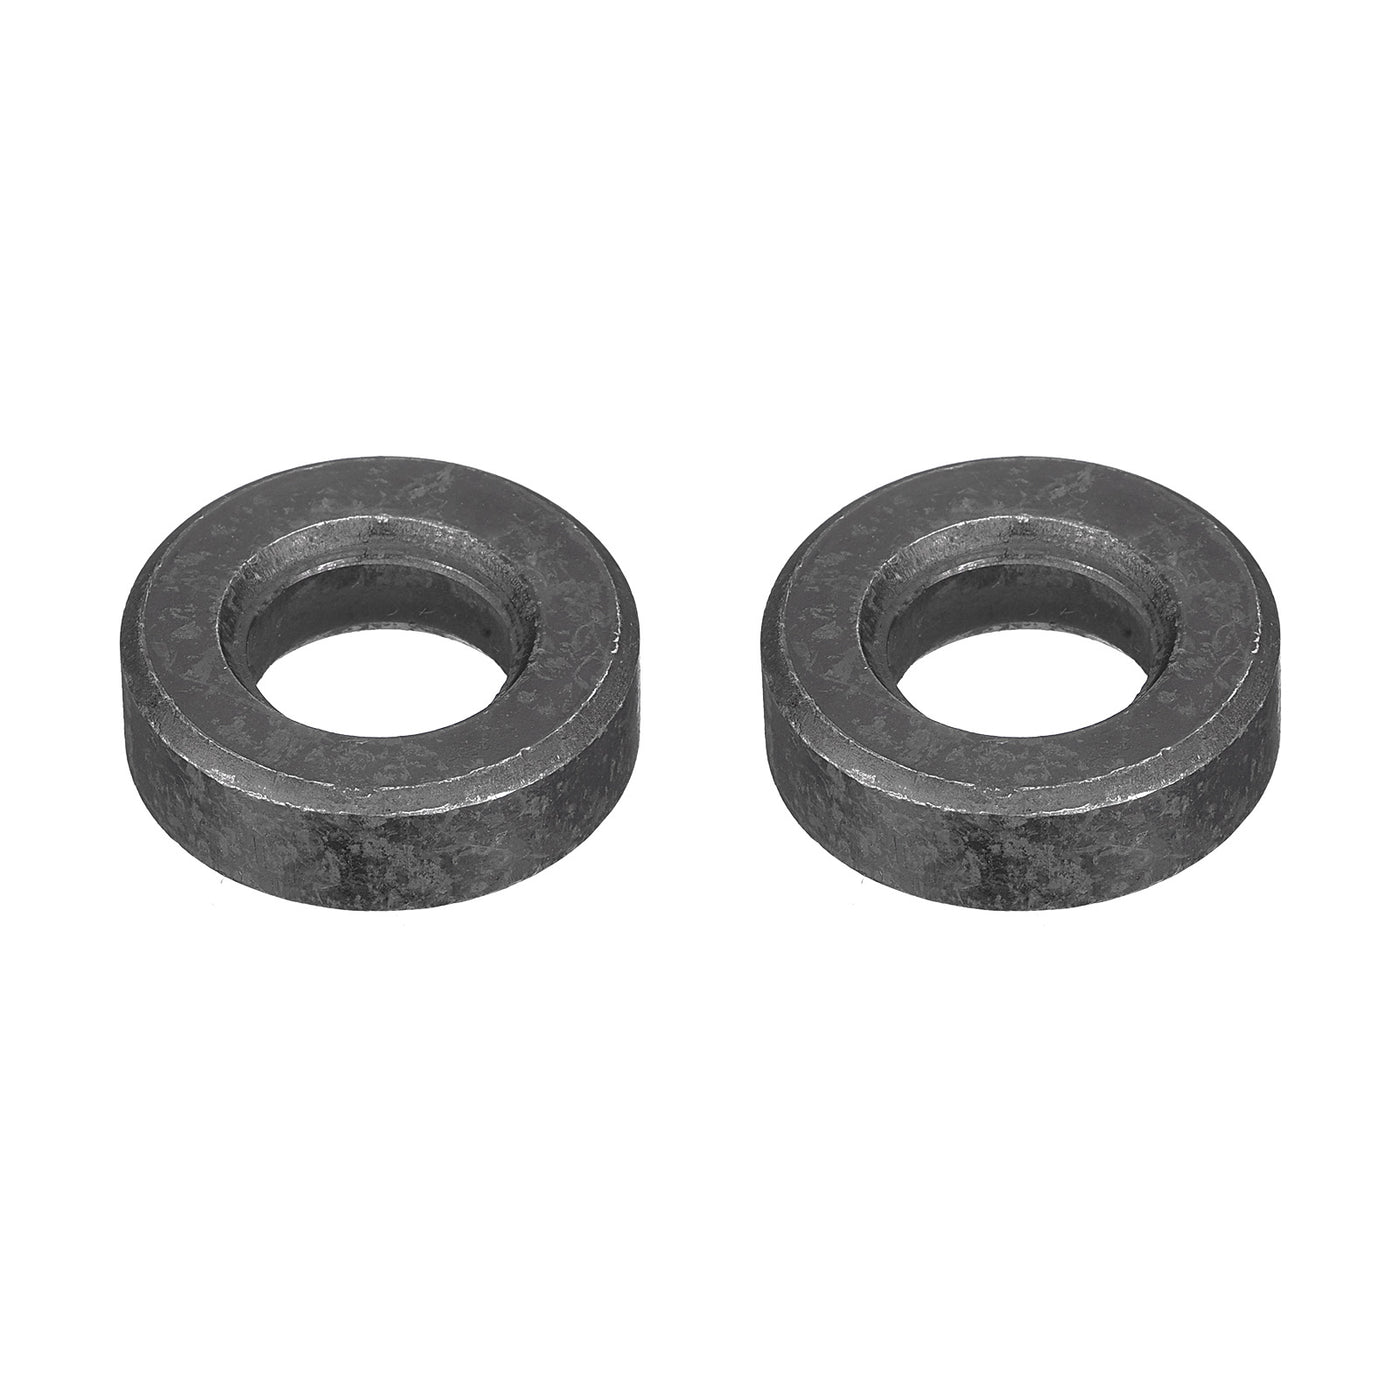 uxcell Uxcell M16 Carbon Steel Flat Washer 2pcs 17x33x10mm Grade 8.8 Alloy Steel Fasteners